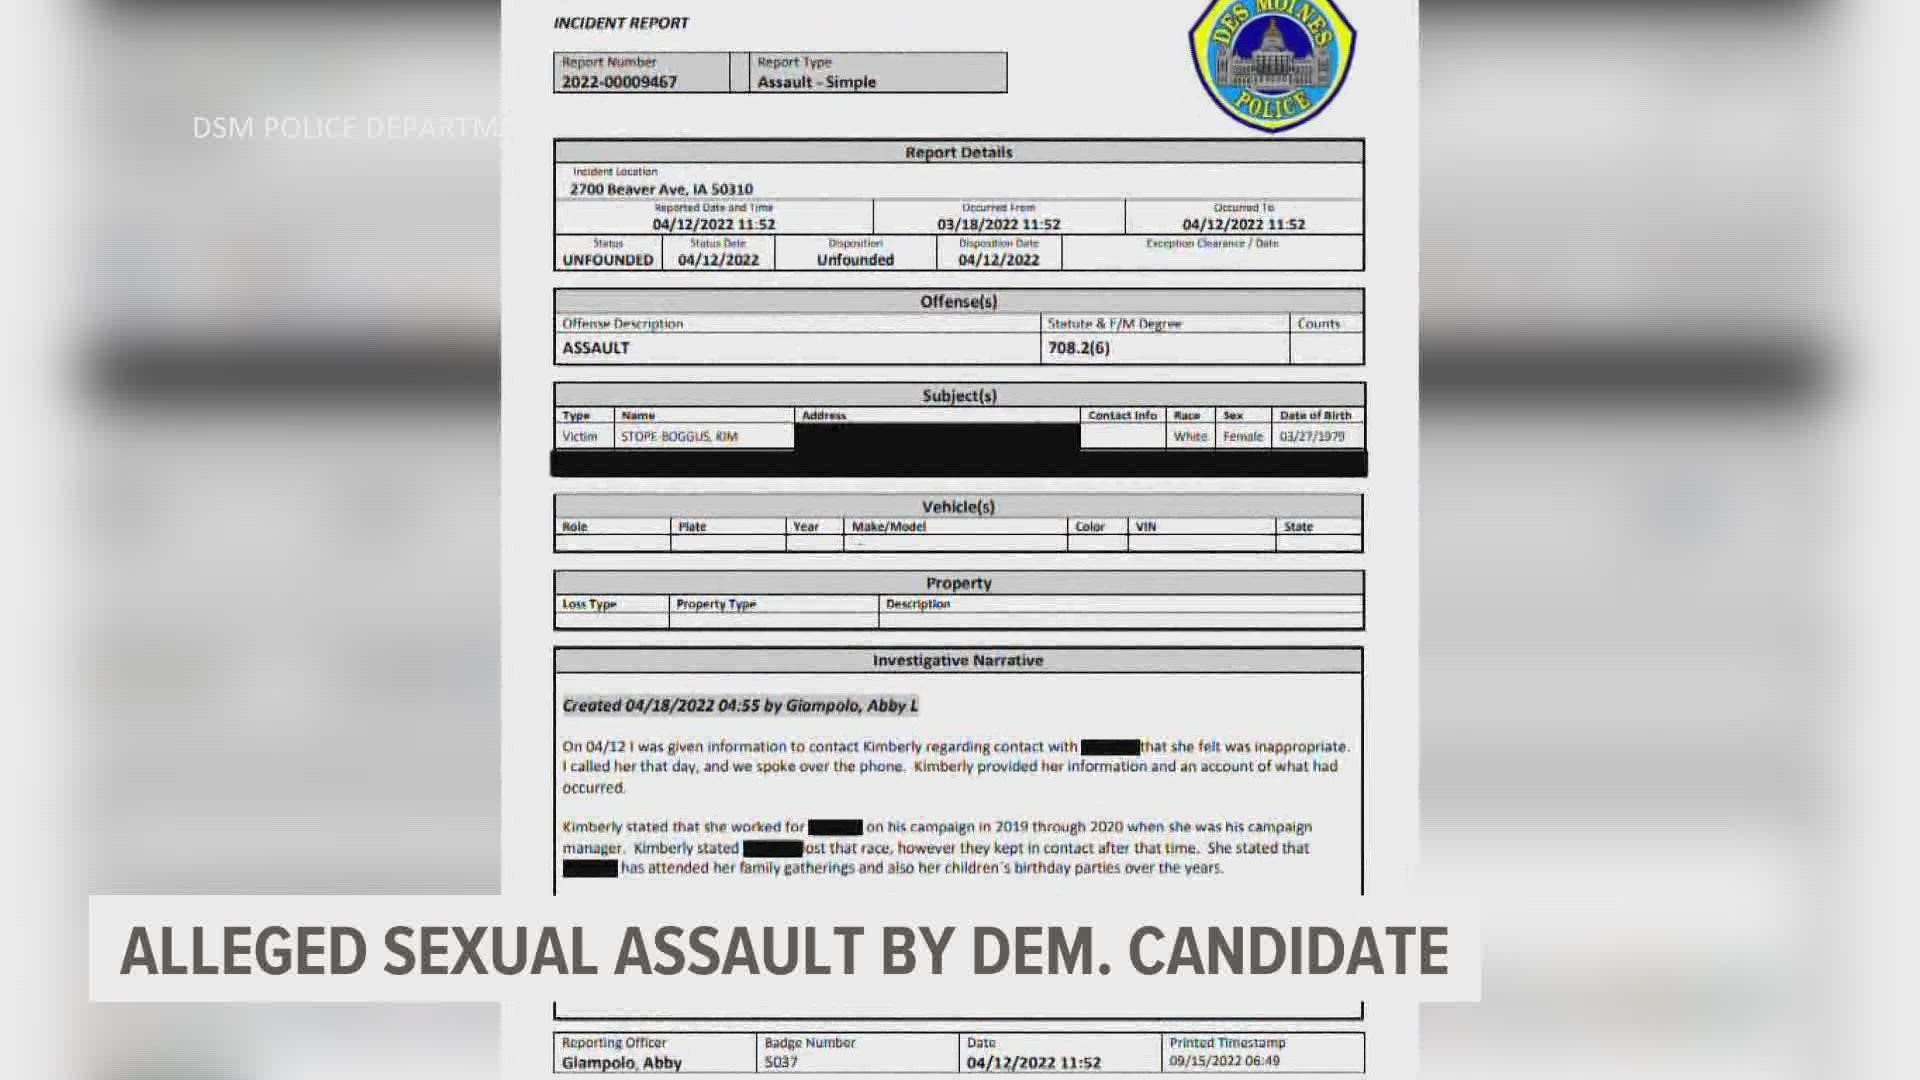 The police report redacted the name of the alleged harasser but references a current Mike Franken staffer. A Franken spokesperson said the allegations "are false."